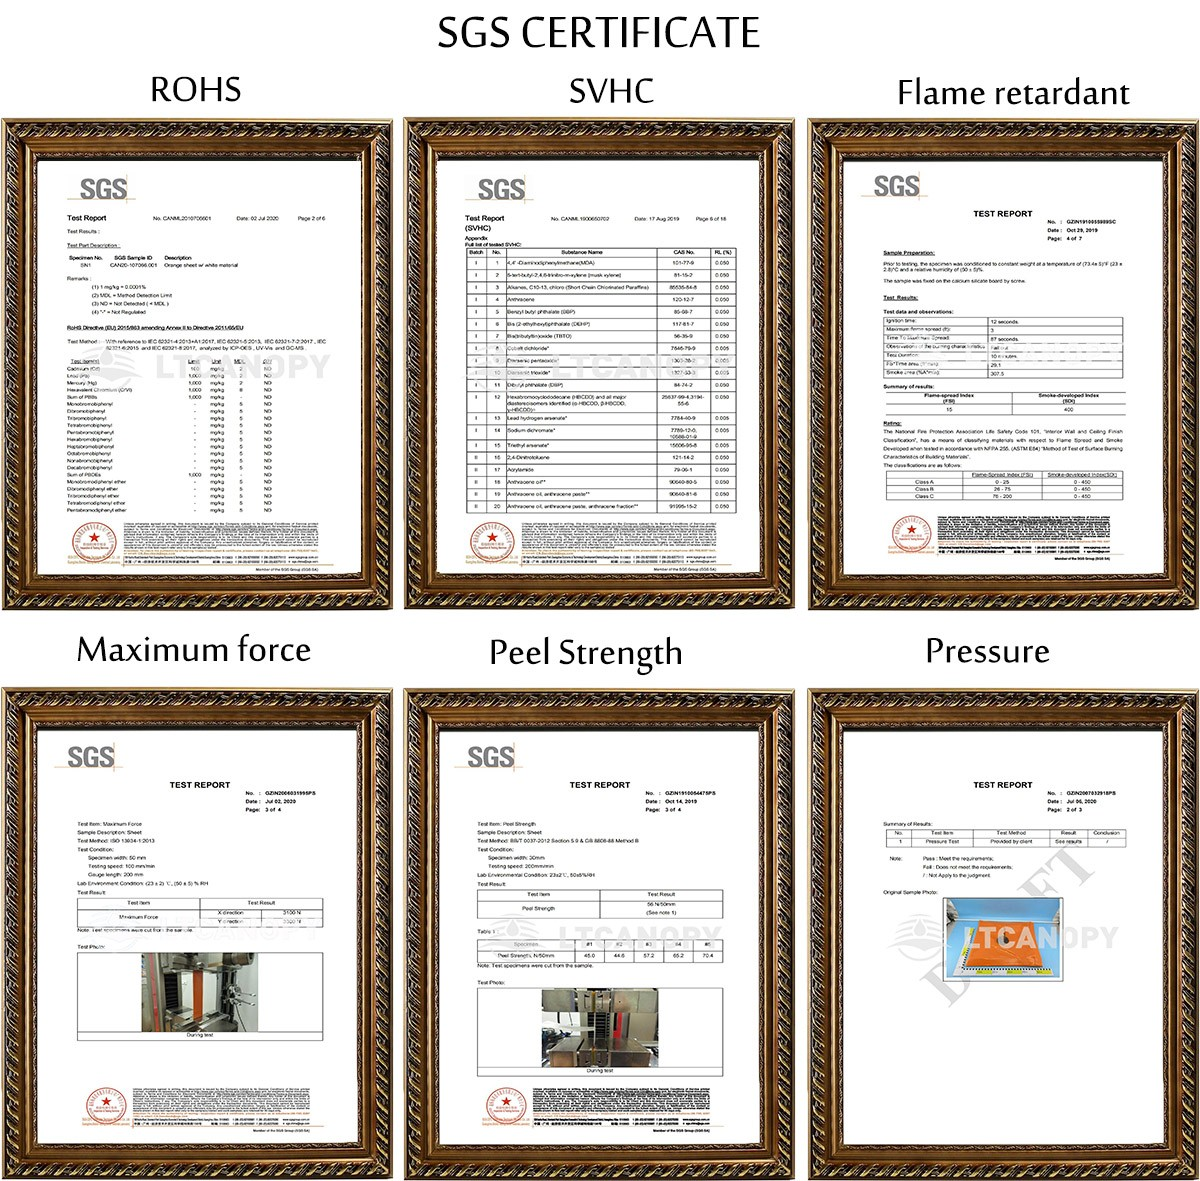 SGS CERTIFICATE for aviation duct hose